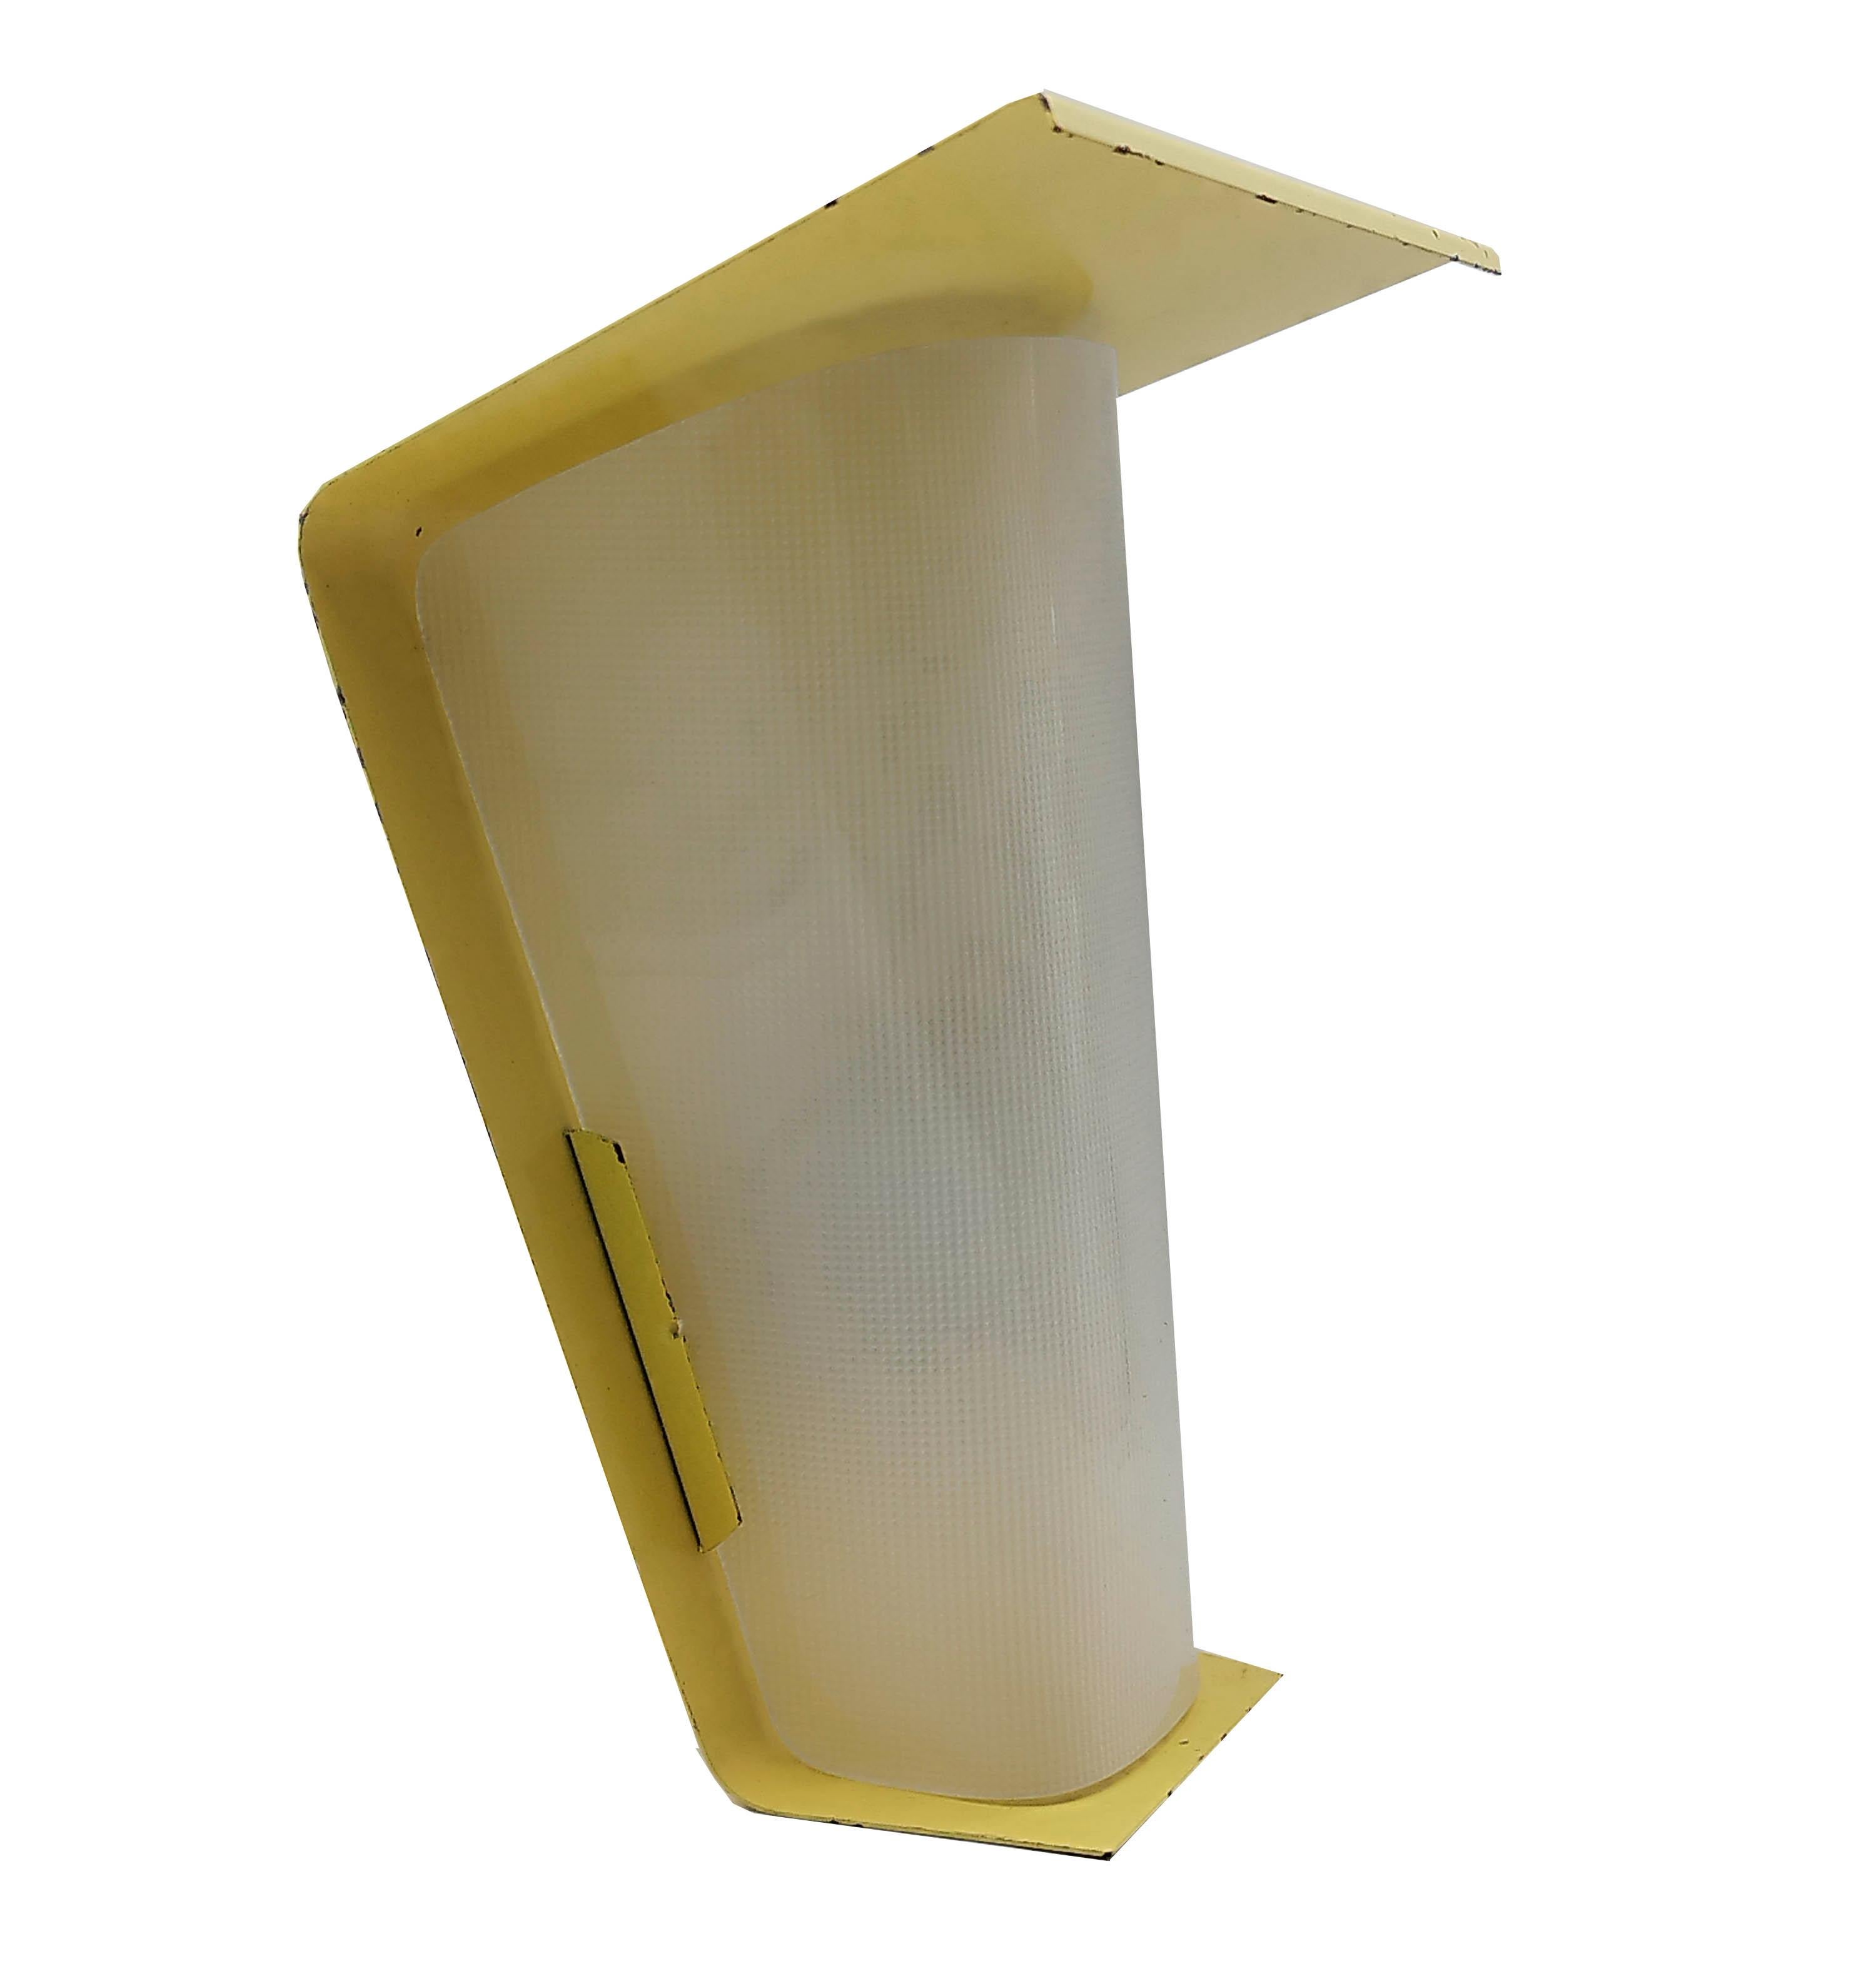 Beautiful and rare outdoor wall sconce from Swiss manufacturer BAG Turgi.
Produced in the 1950s, this modernist design is made of yellow lacquered metal.
The Swiss company BAG Turgi is greatly inspired by Bauhaus theories and offers a functional and